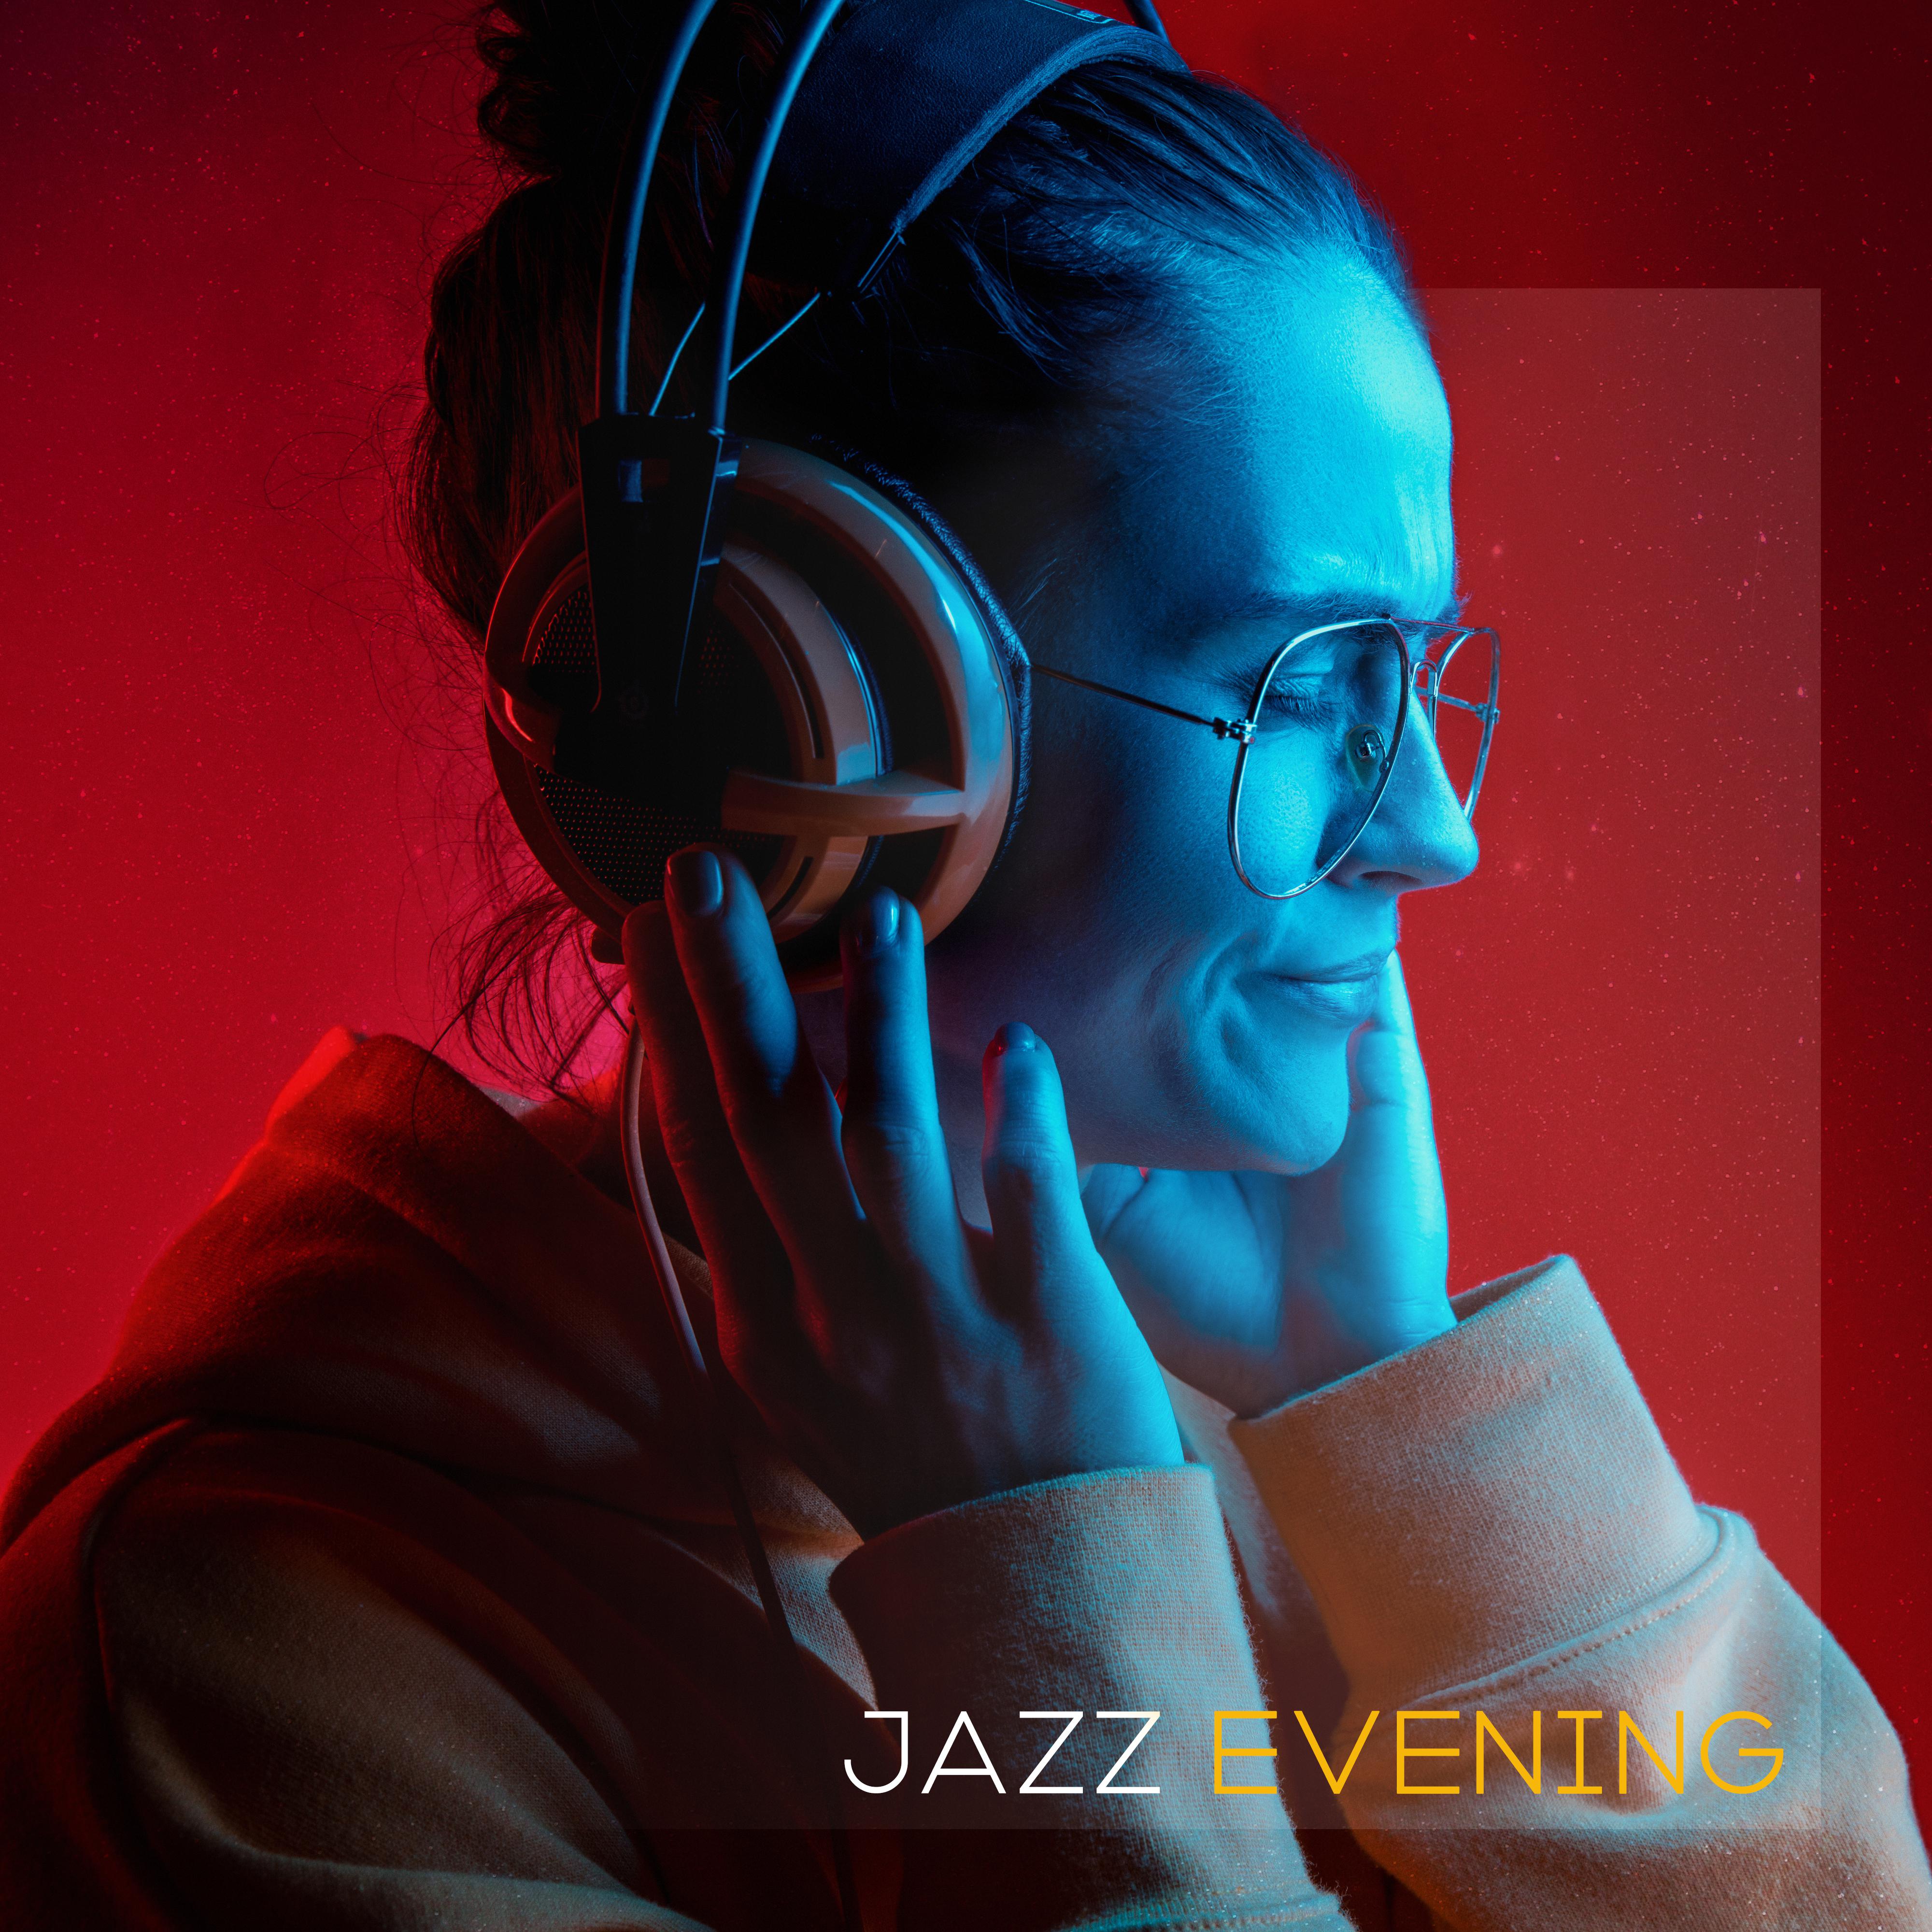 Jazz Evening: Relaxing Sounds for Calm, Silent and Soothing Evening